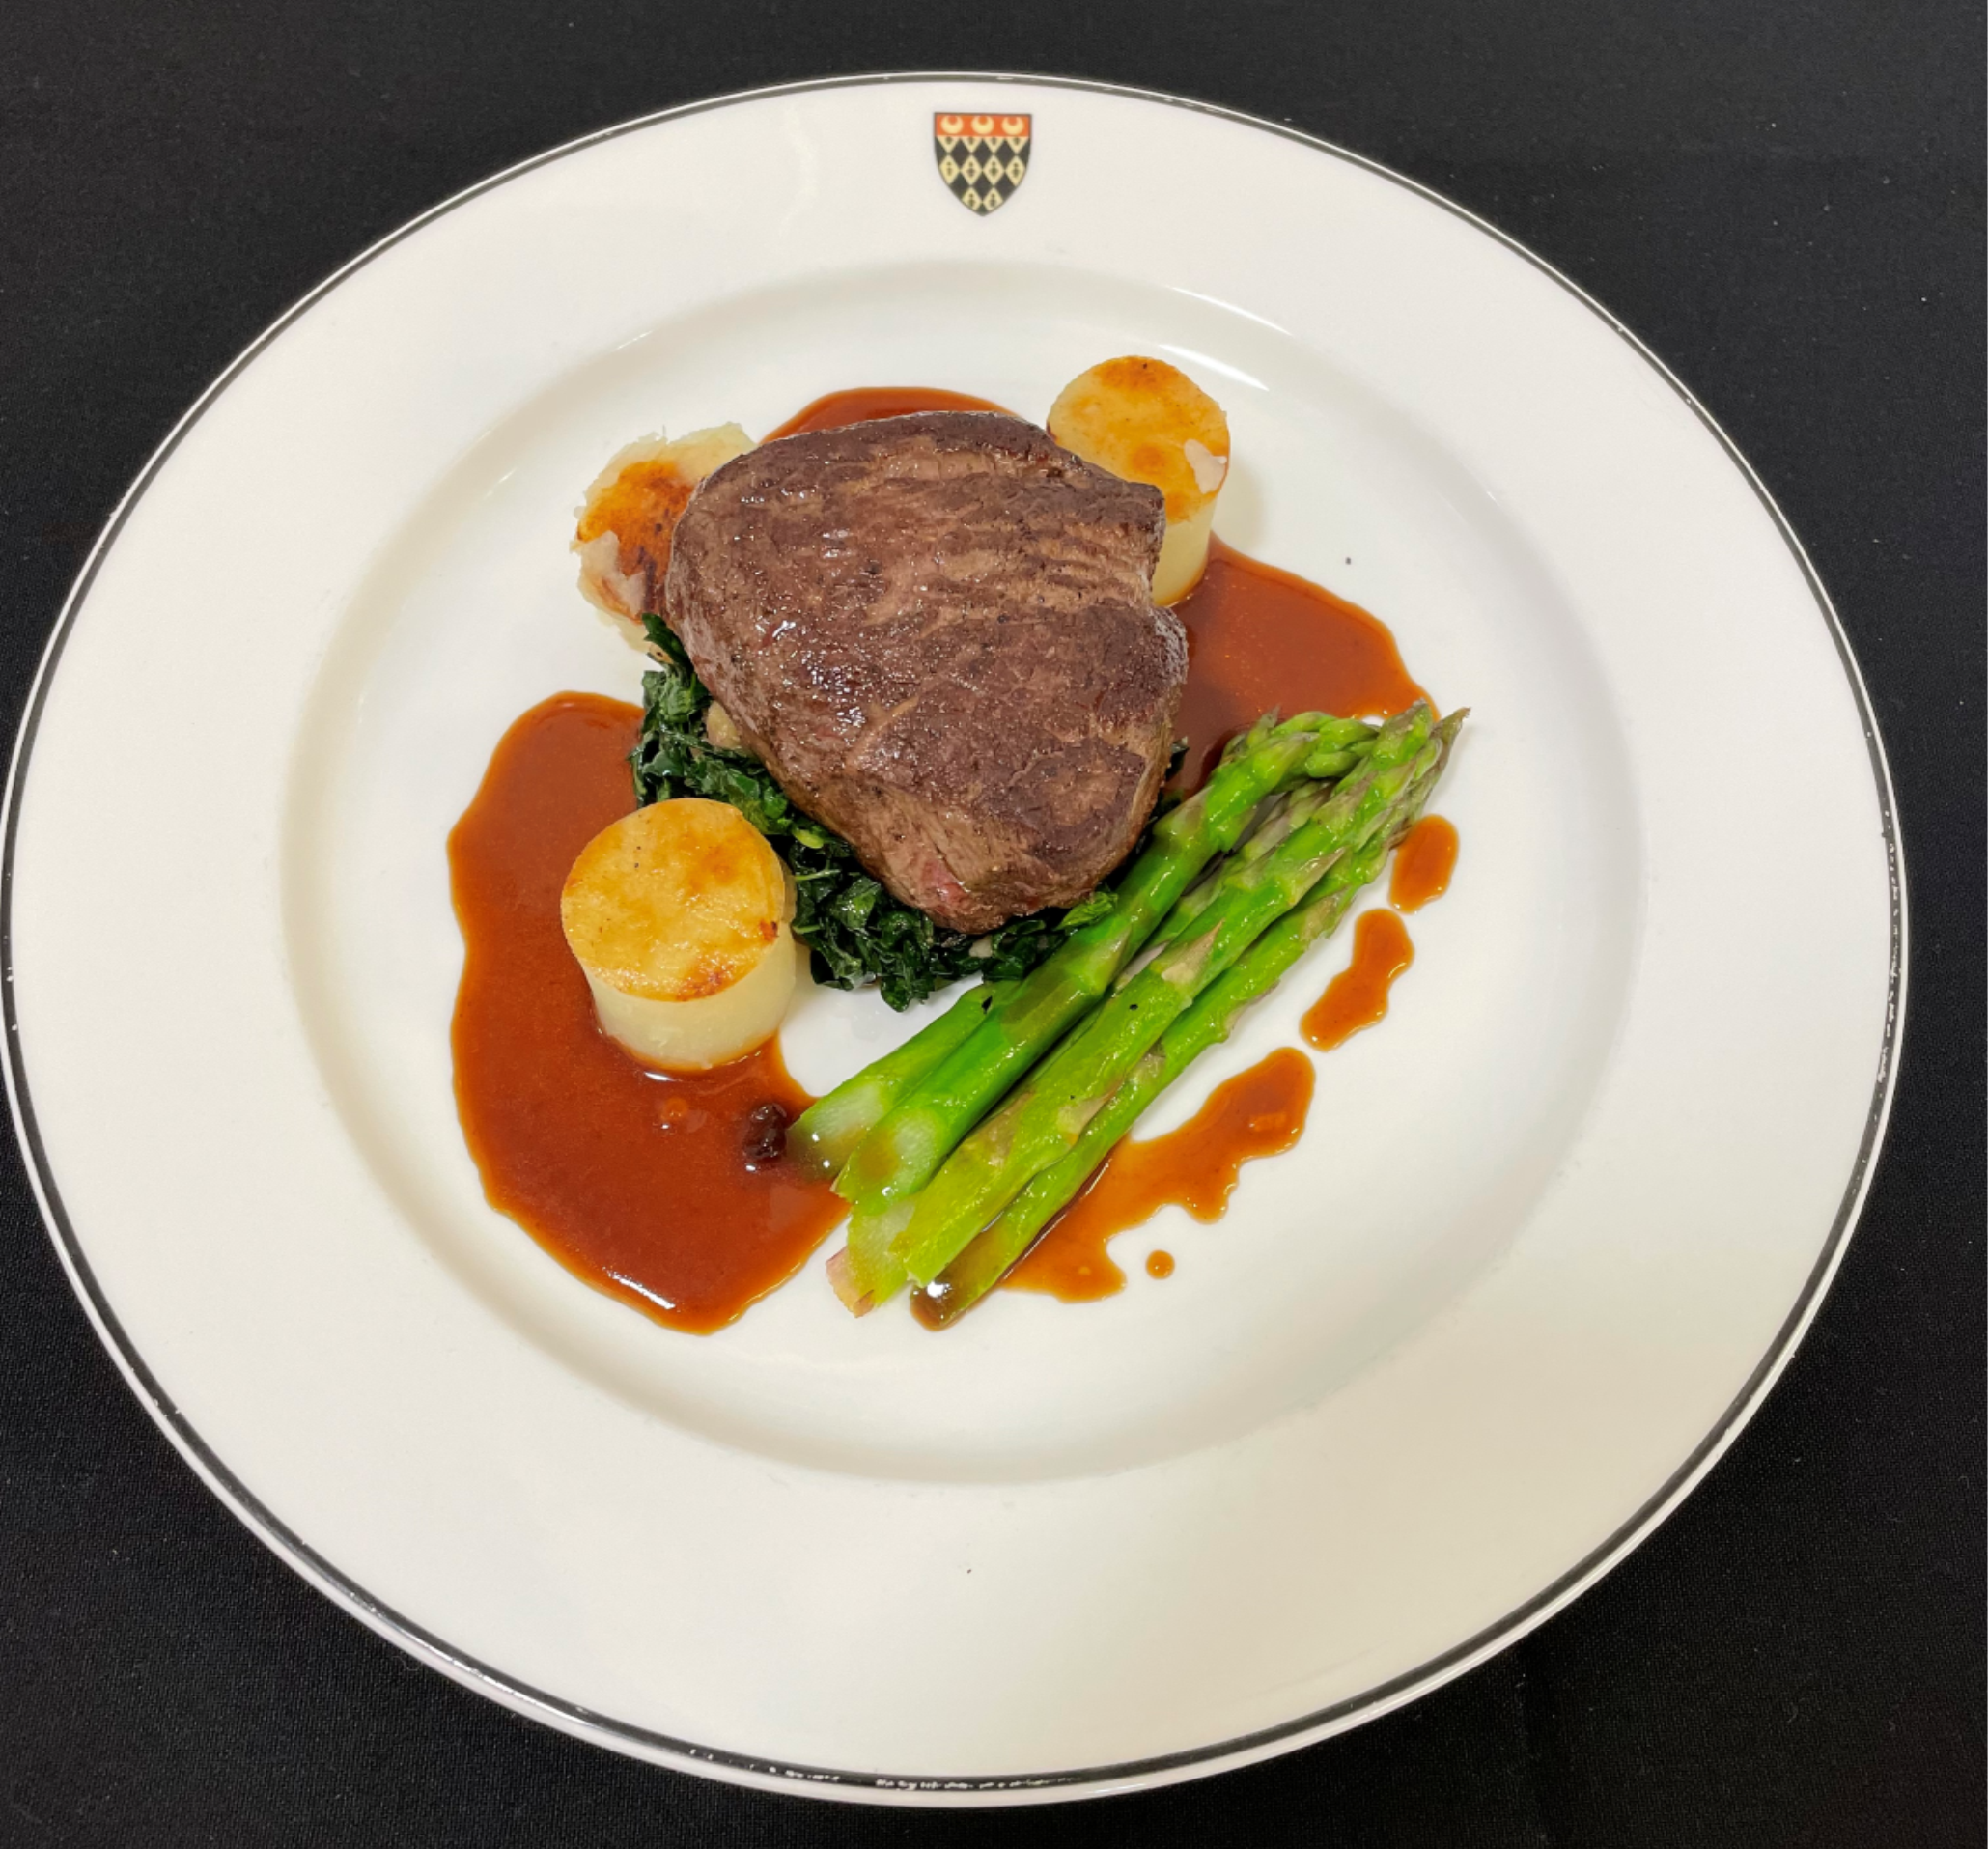 Fillet of beef (£10 supplement) on a bed of chestnut and spinach served with potato fondant, asparagus and port jus